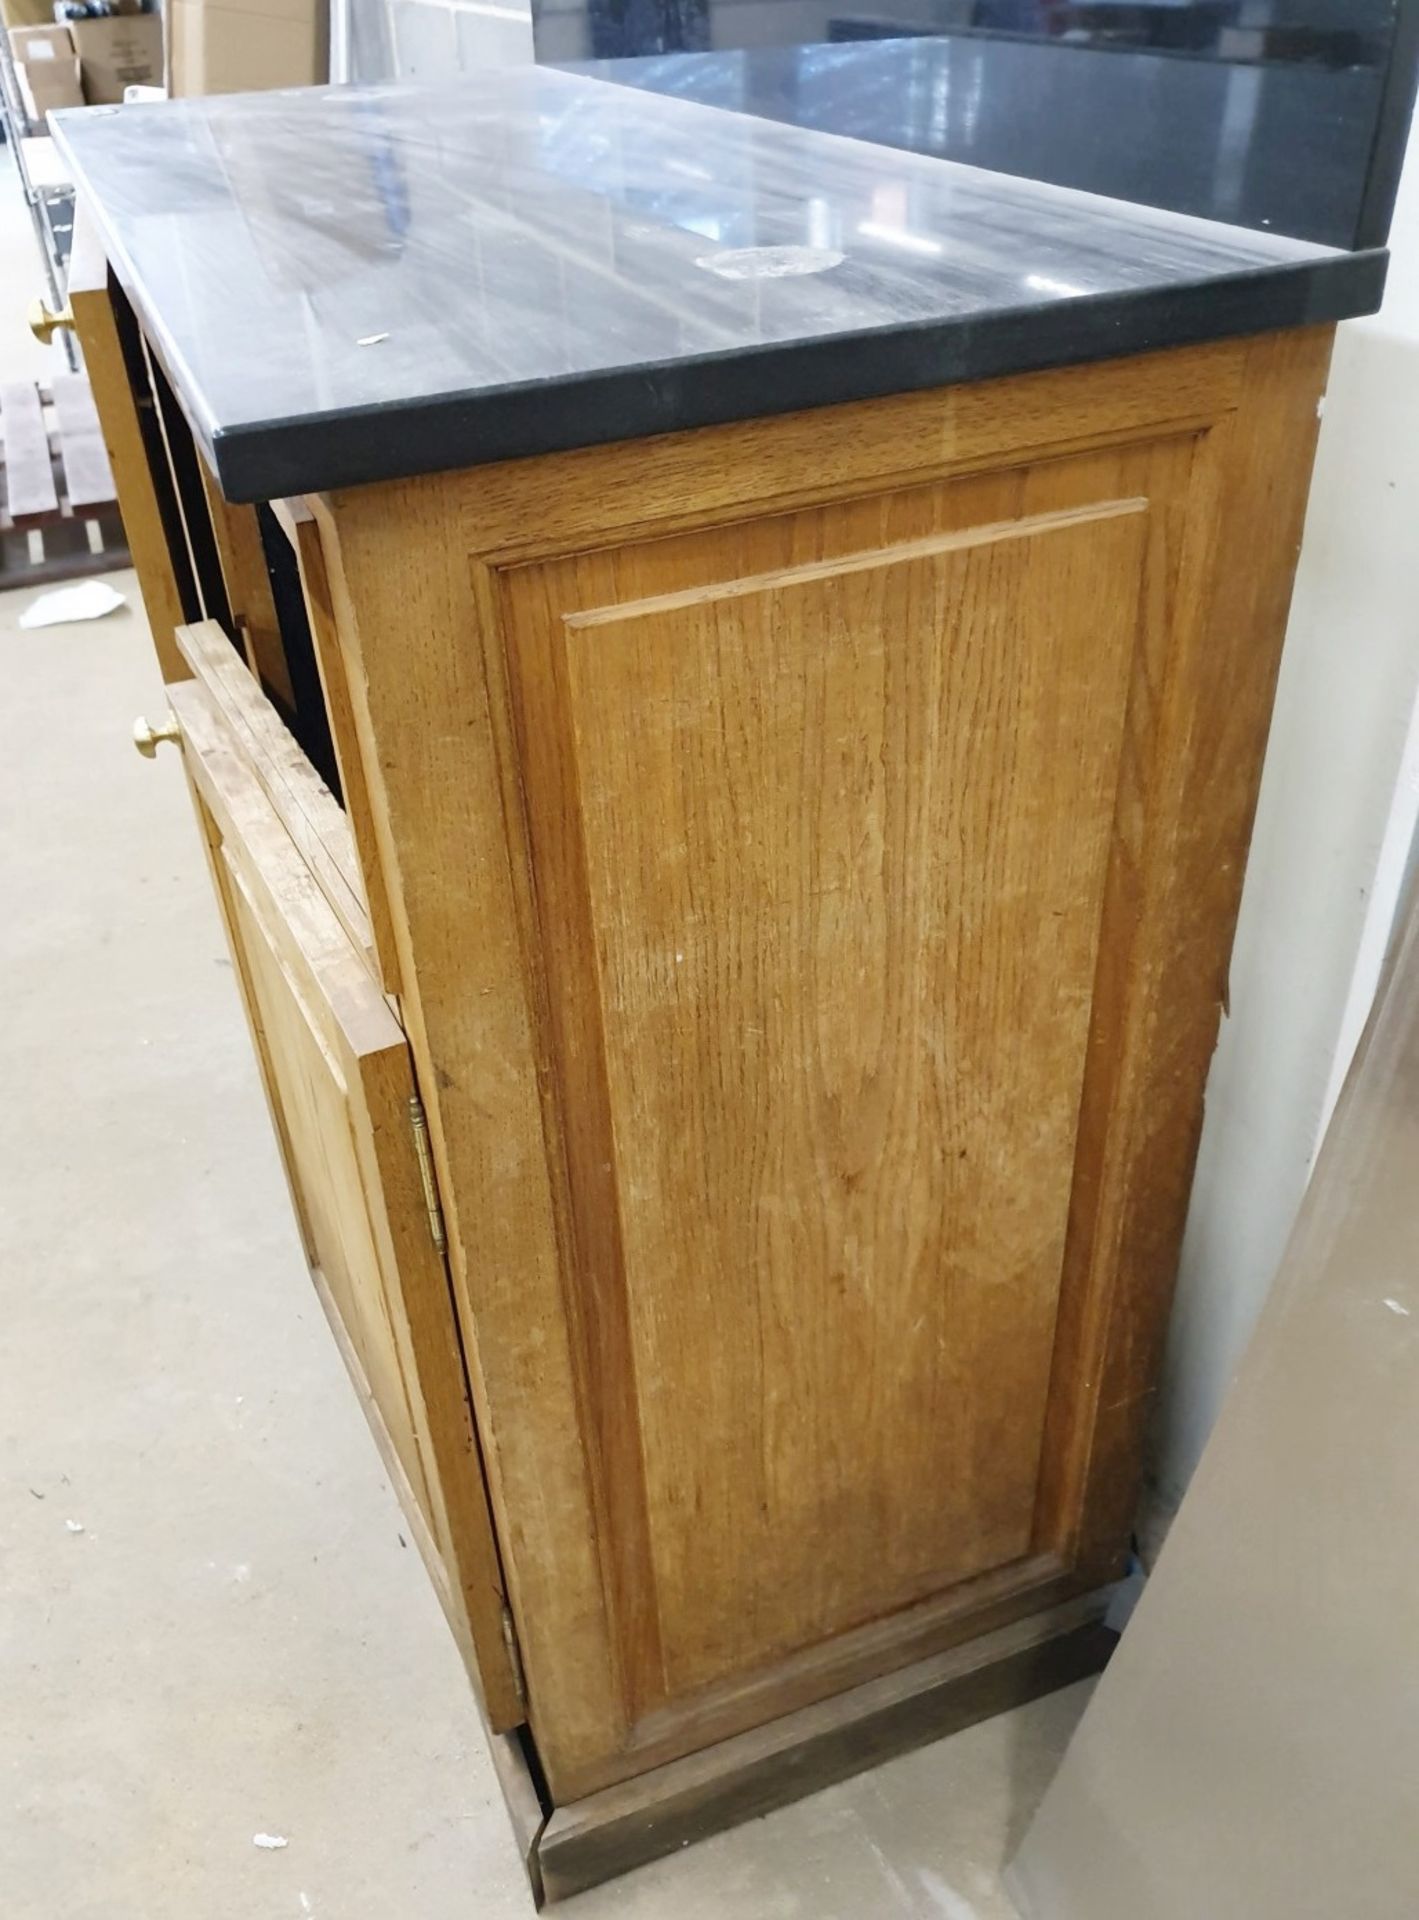 1 x Waitress / Waiter Service Counter With Granite Worktop - H105 x W120 x D51 cms - Ref PA213 - - Image 3 of 5